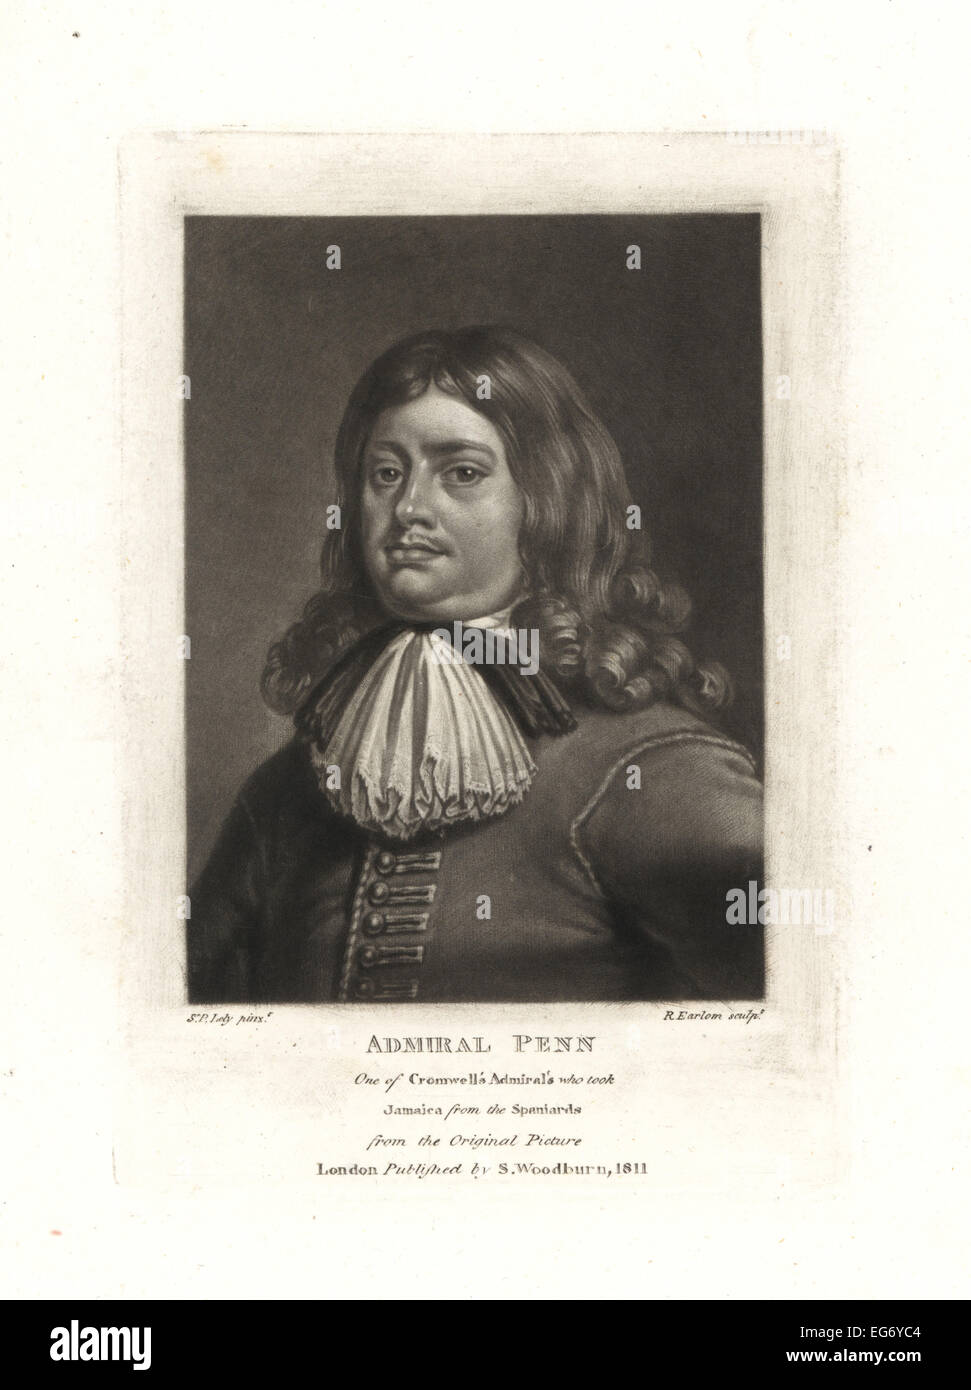 Sir William Penn, admiral for Oliver Cromwell's navy who took Jamaica from the Spanish, father of the founder of Pennsylvania, died 1670. Stock Photo